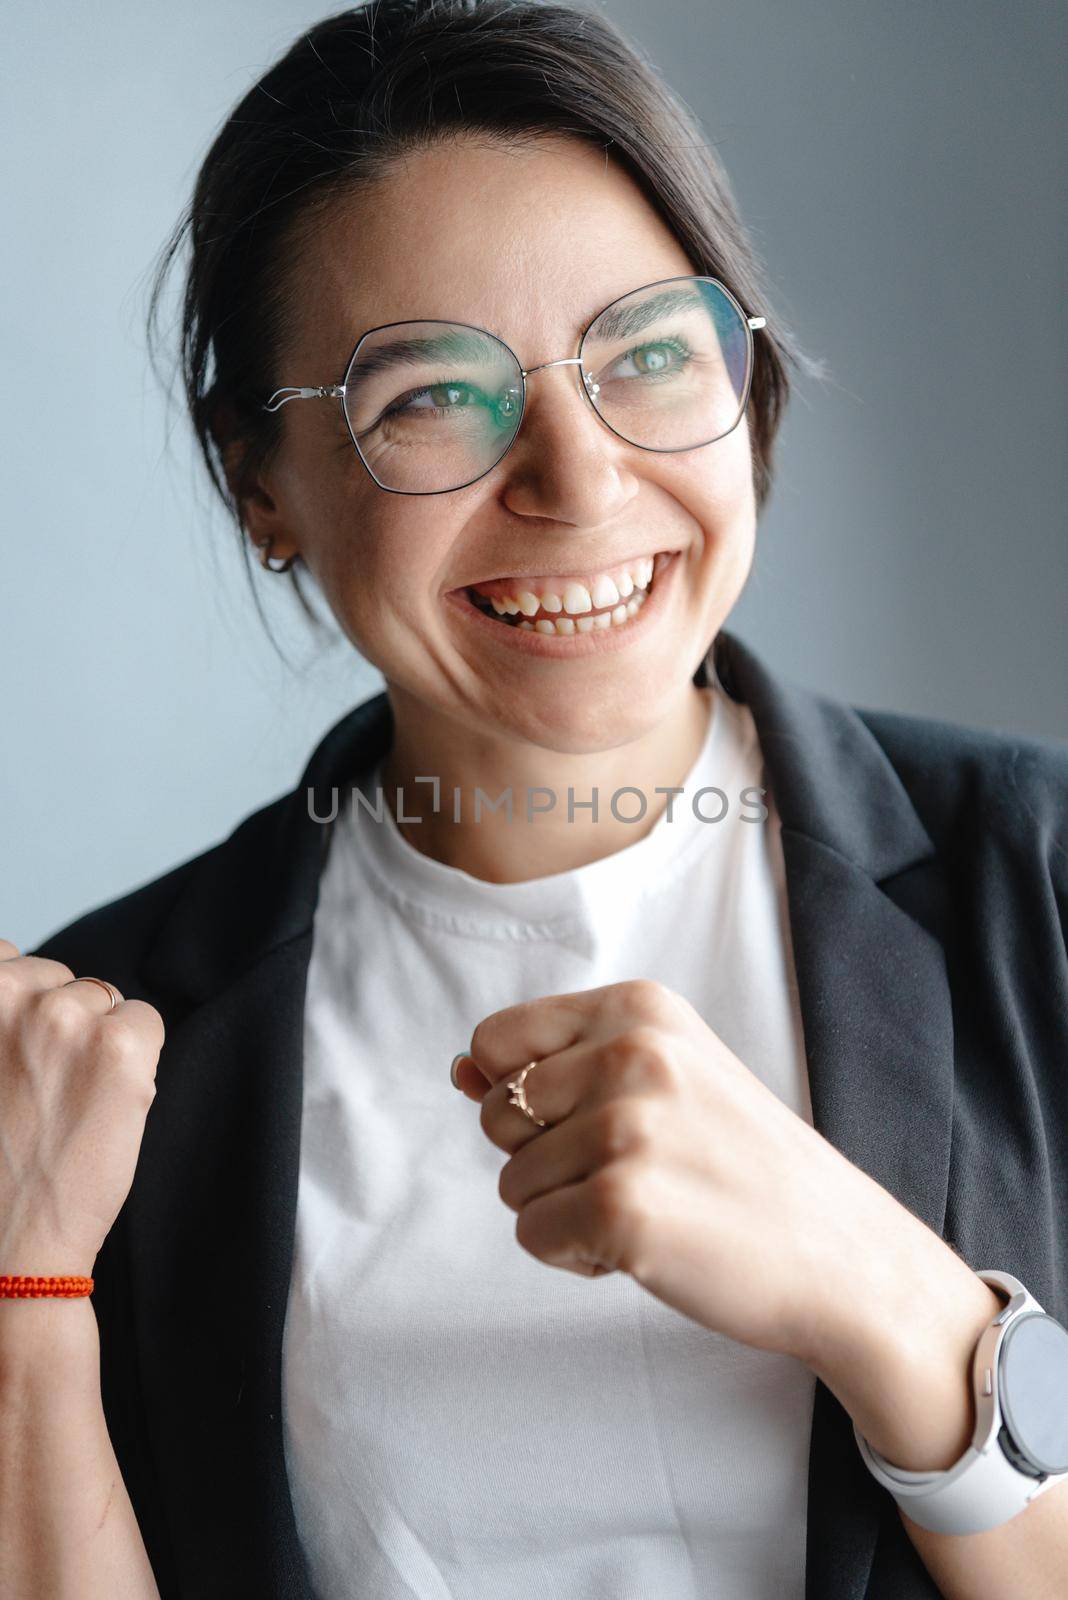 Portrait of a young mixed-race girl - Happy woman smiling for the camera - Concept of the Millennial generation and multi-ethnicity - Focus on the face